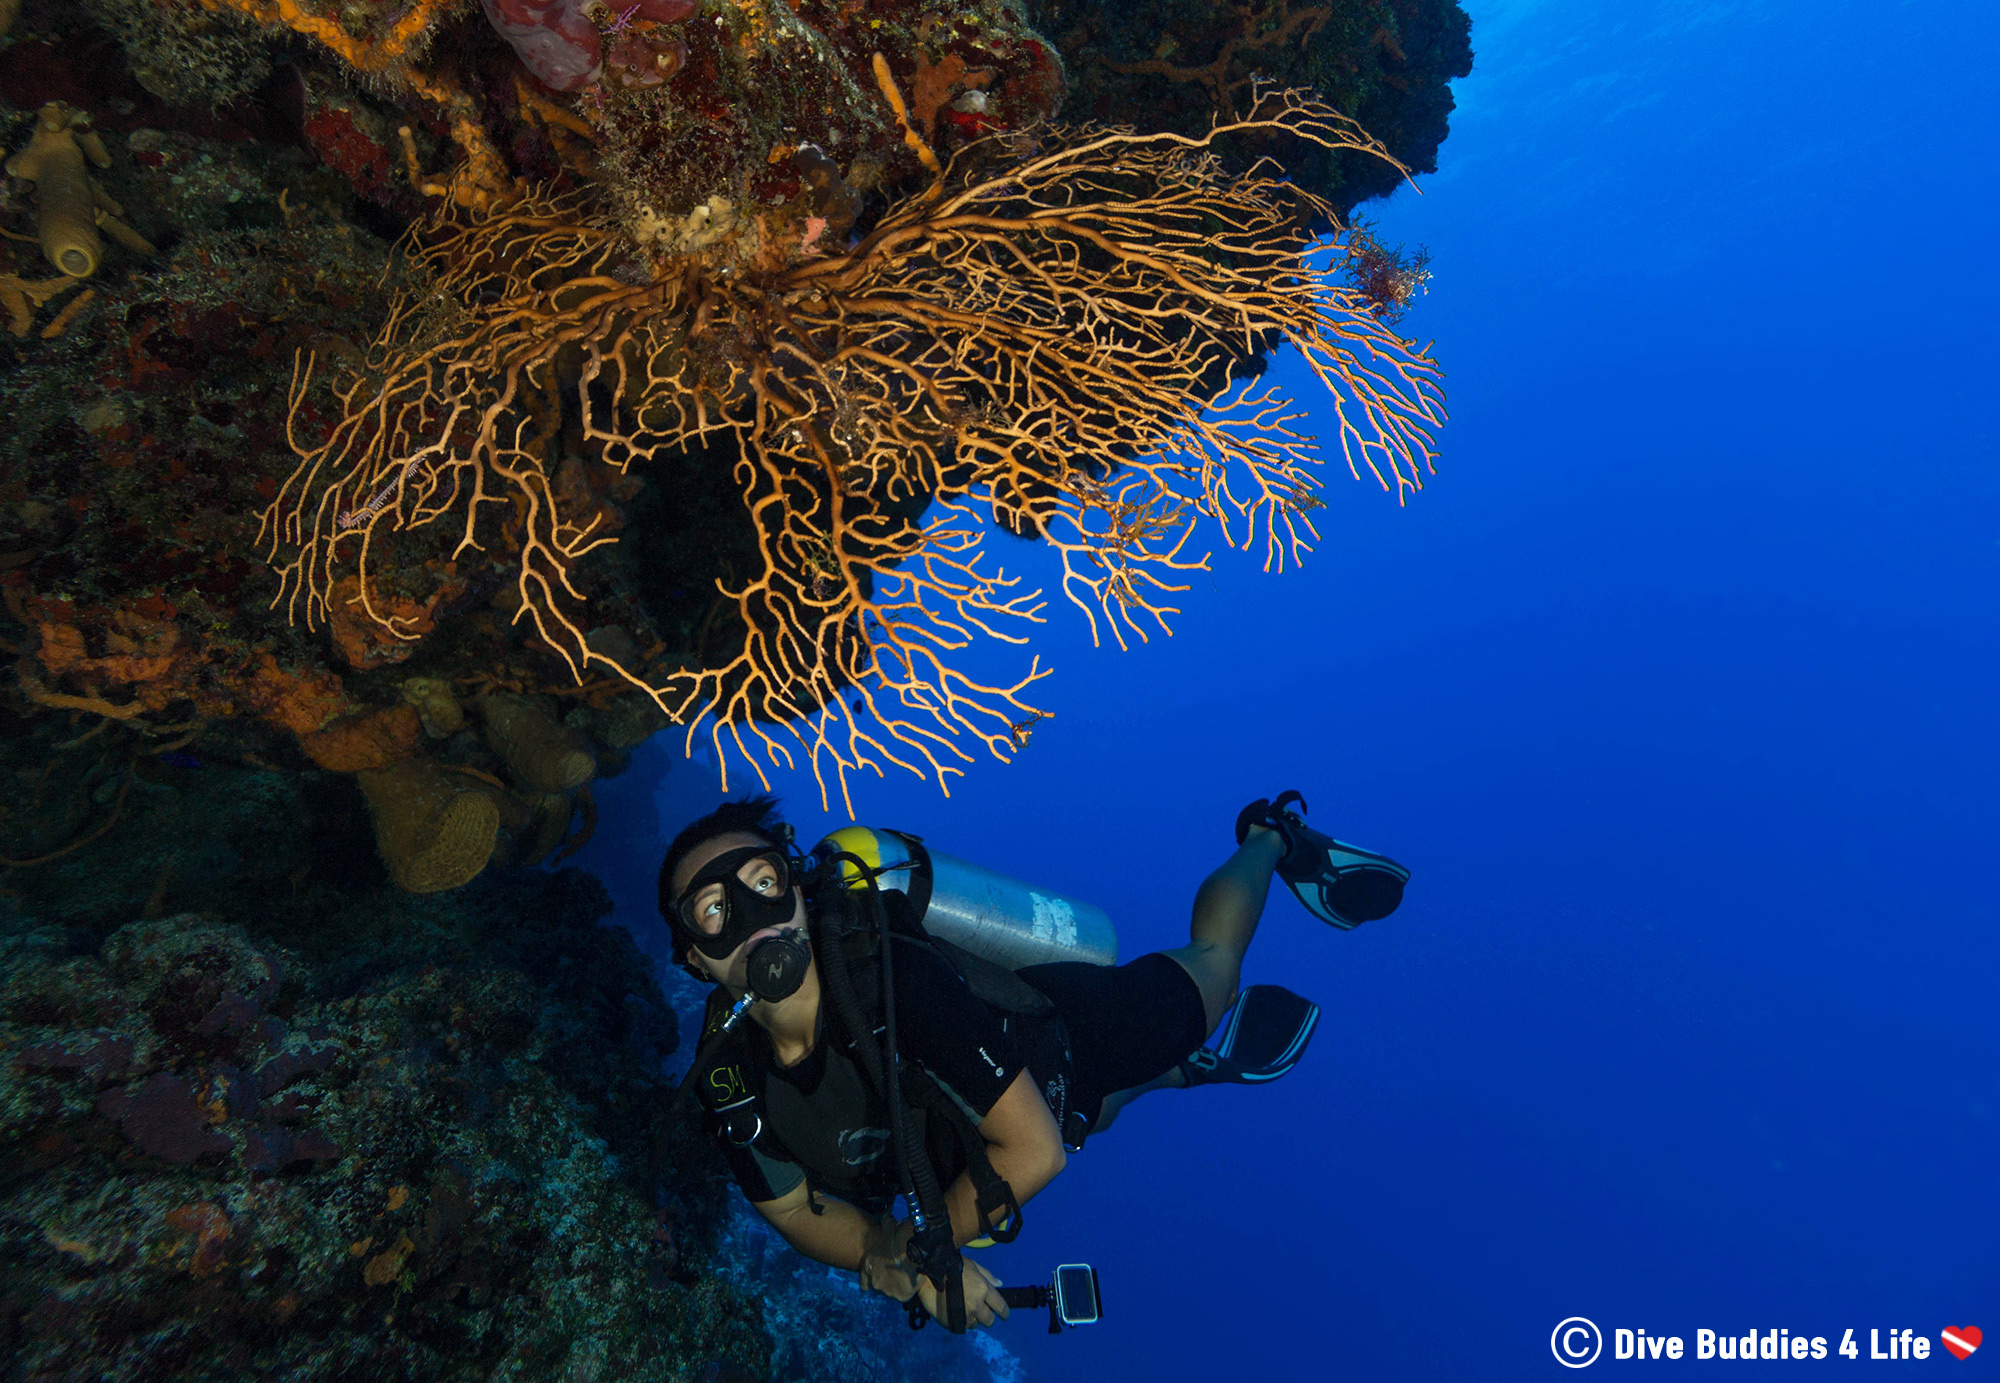 A Female Scuba Diver Gazing At A Gorgonian While Underwater In Cozumel, Mexico